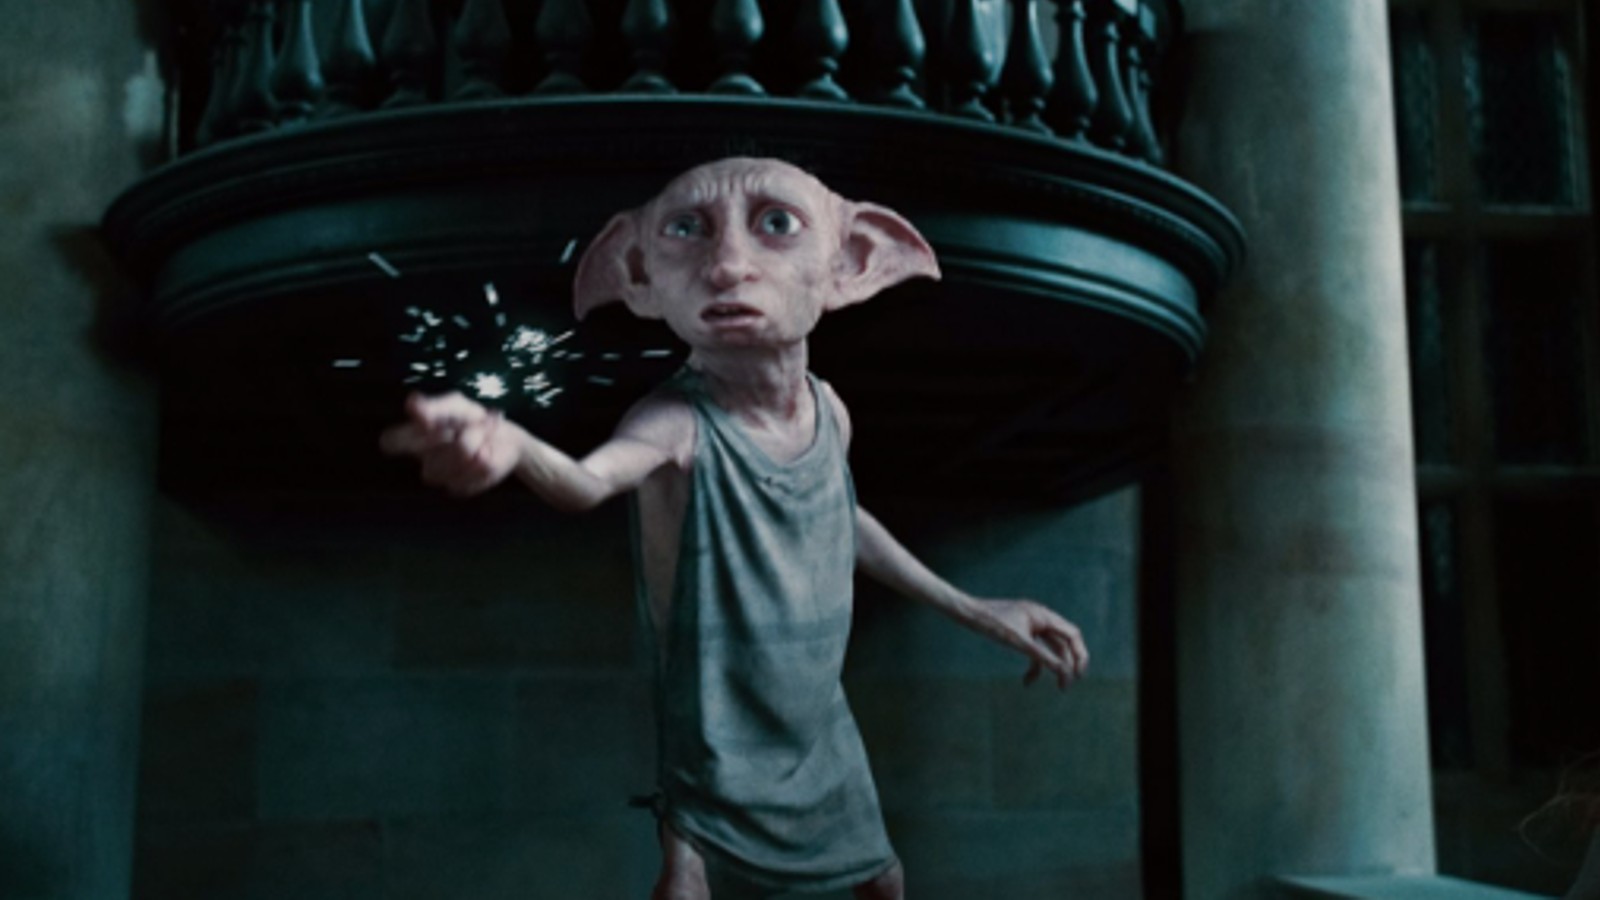 Why does Dobby talk in the third person? - Quora